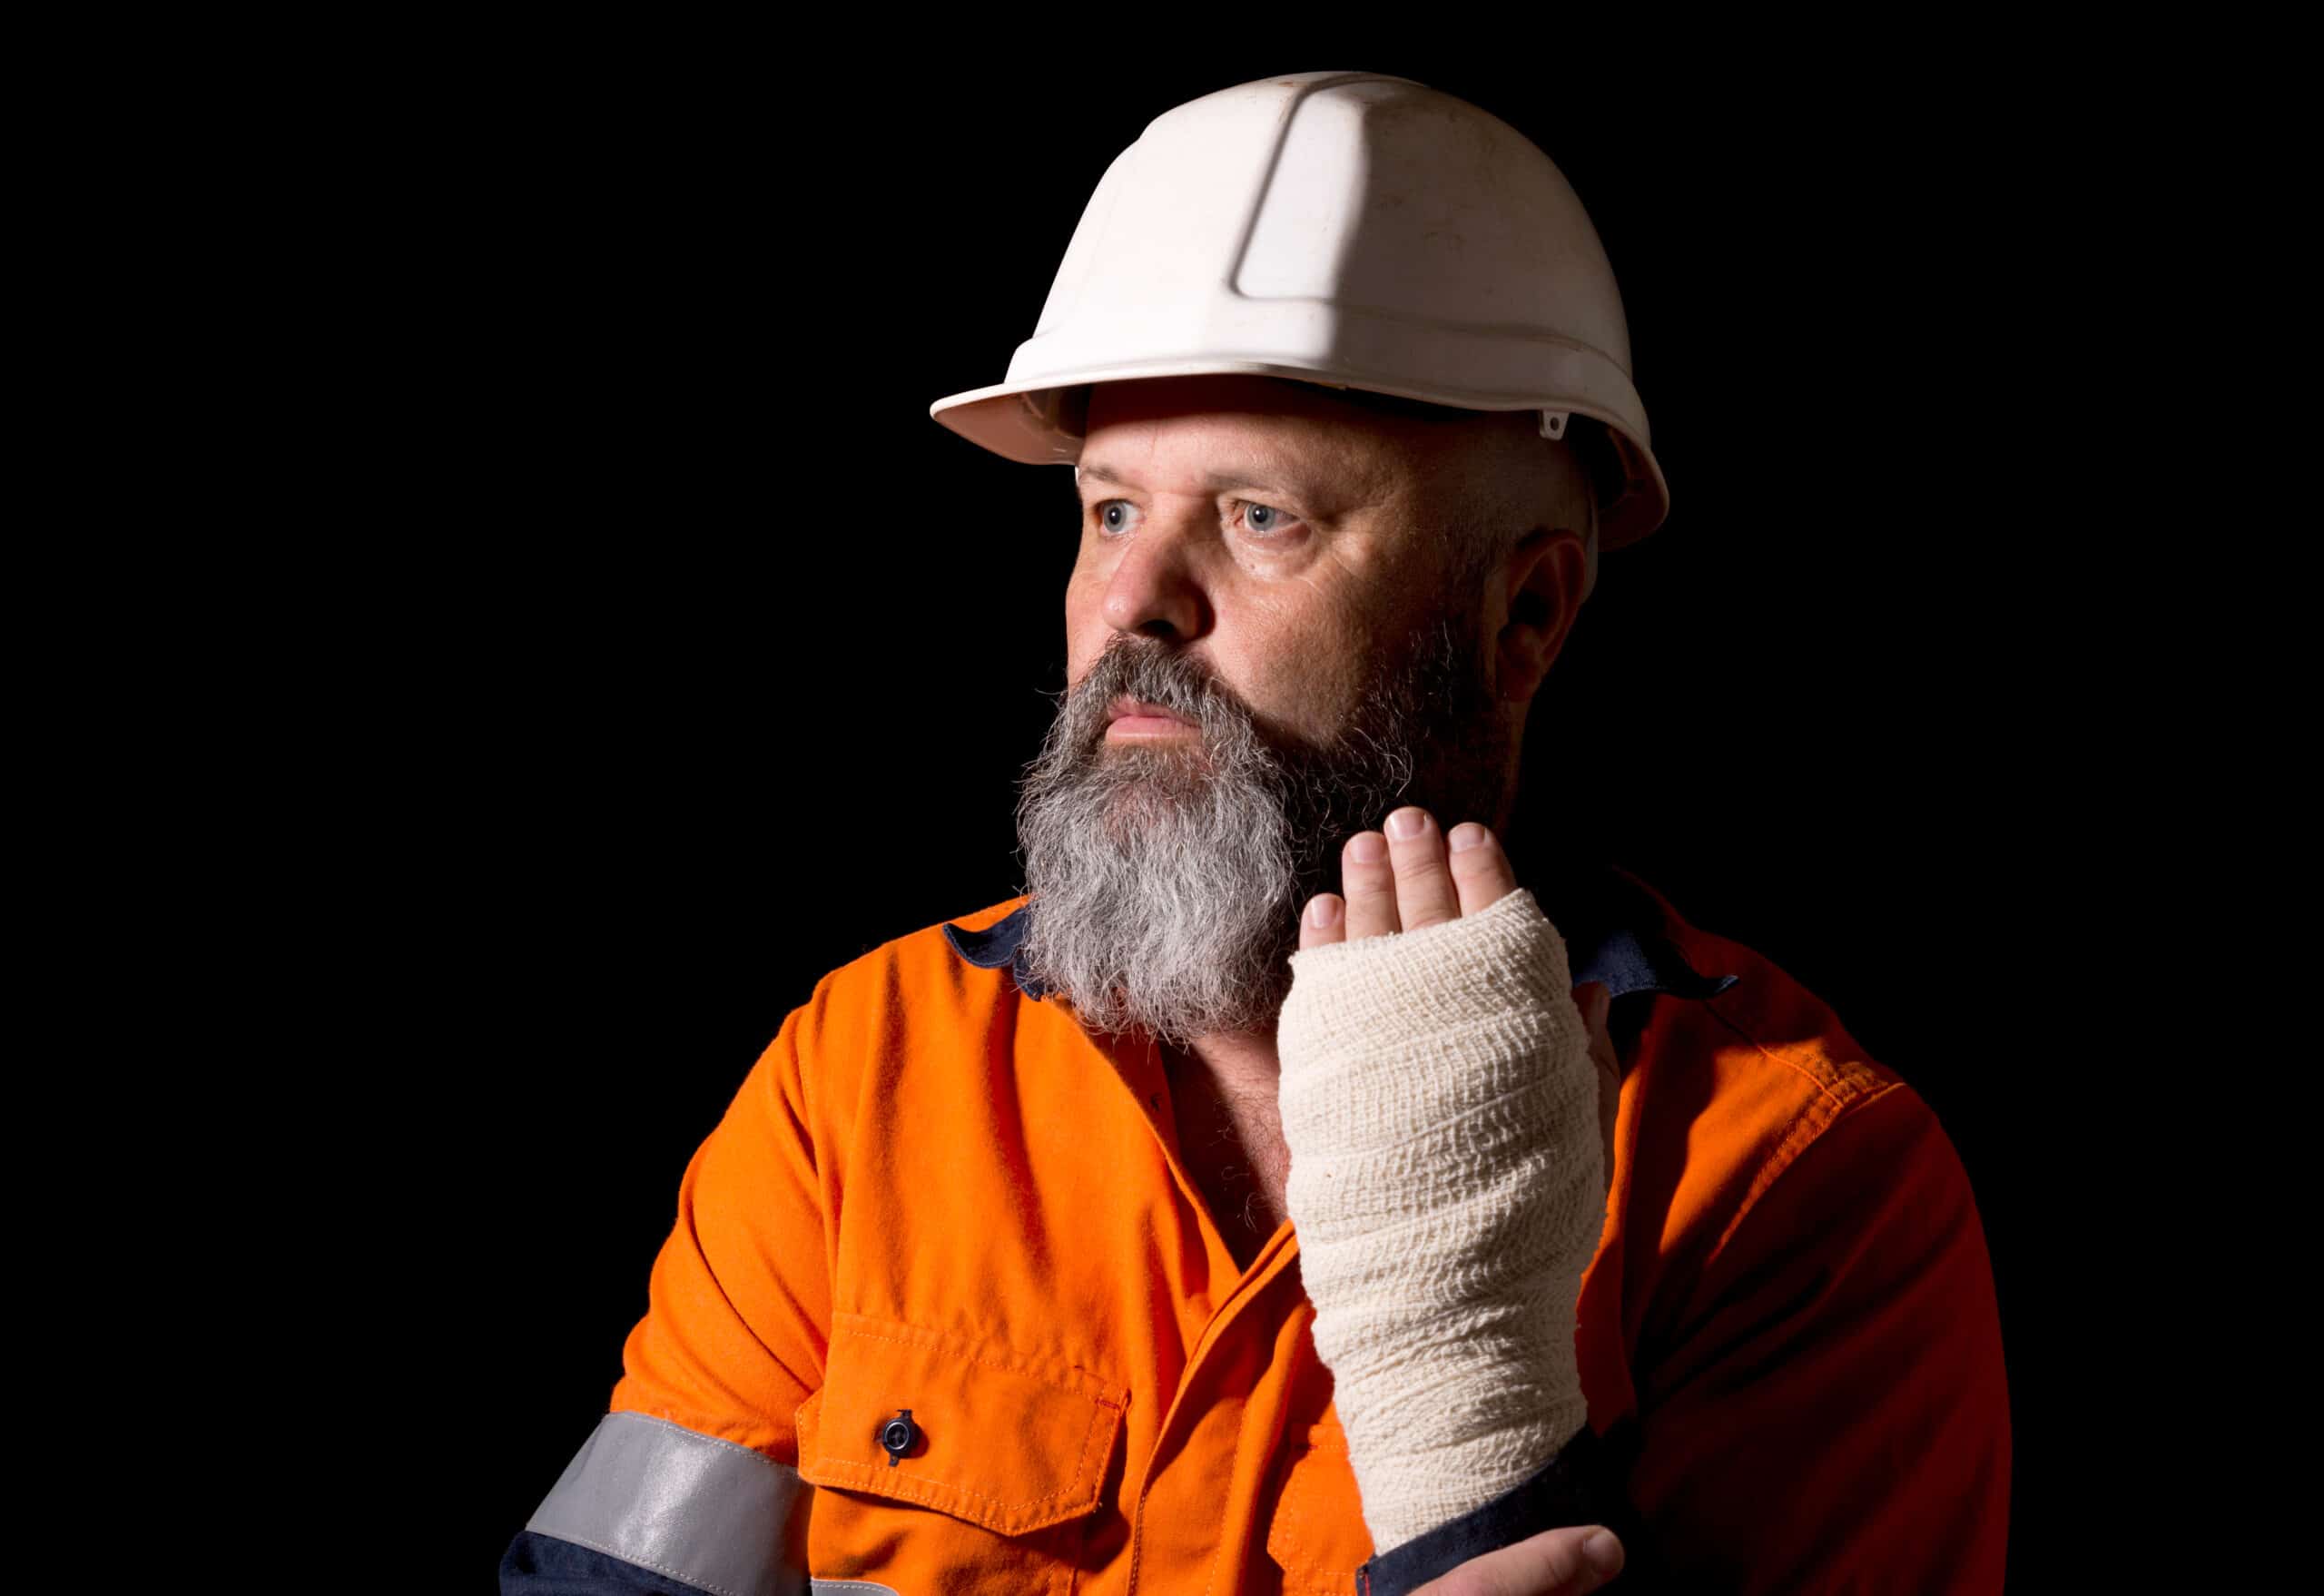 Injured at work in Qld